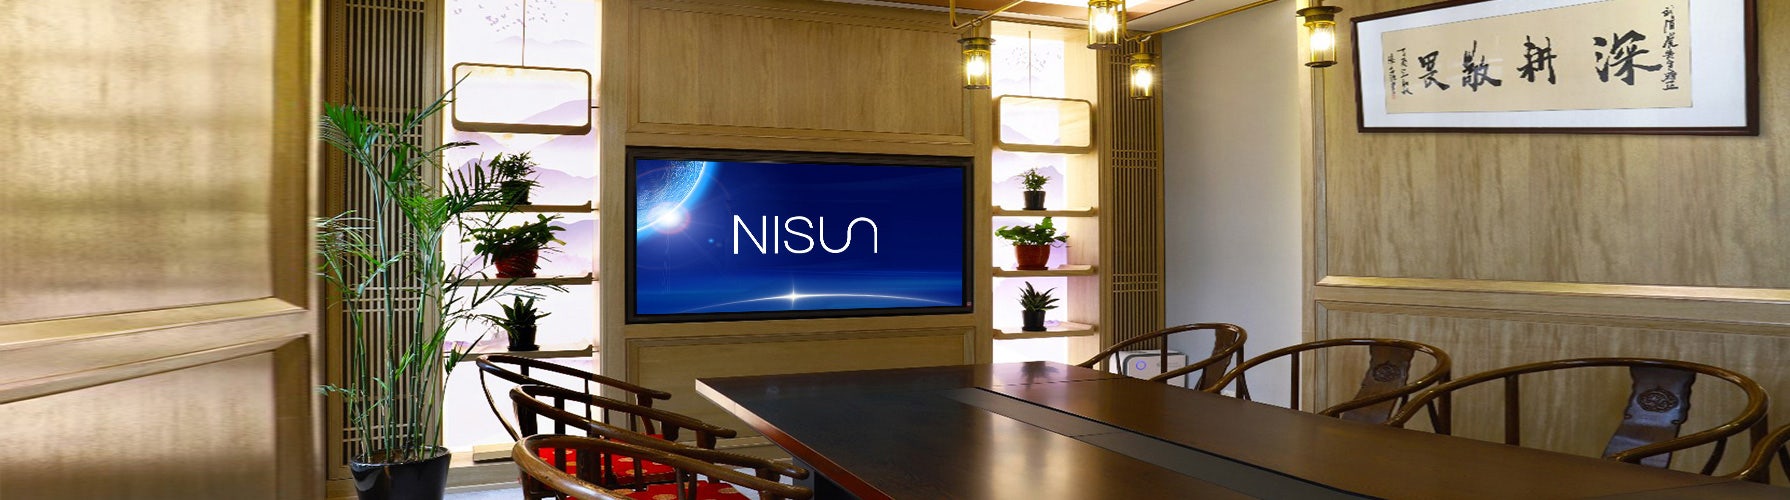 EXCLUSIVE: Nisun Collaborates With Pinhutang Distillery To Boost China's Agricultural Practices